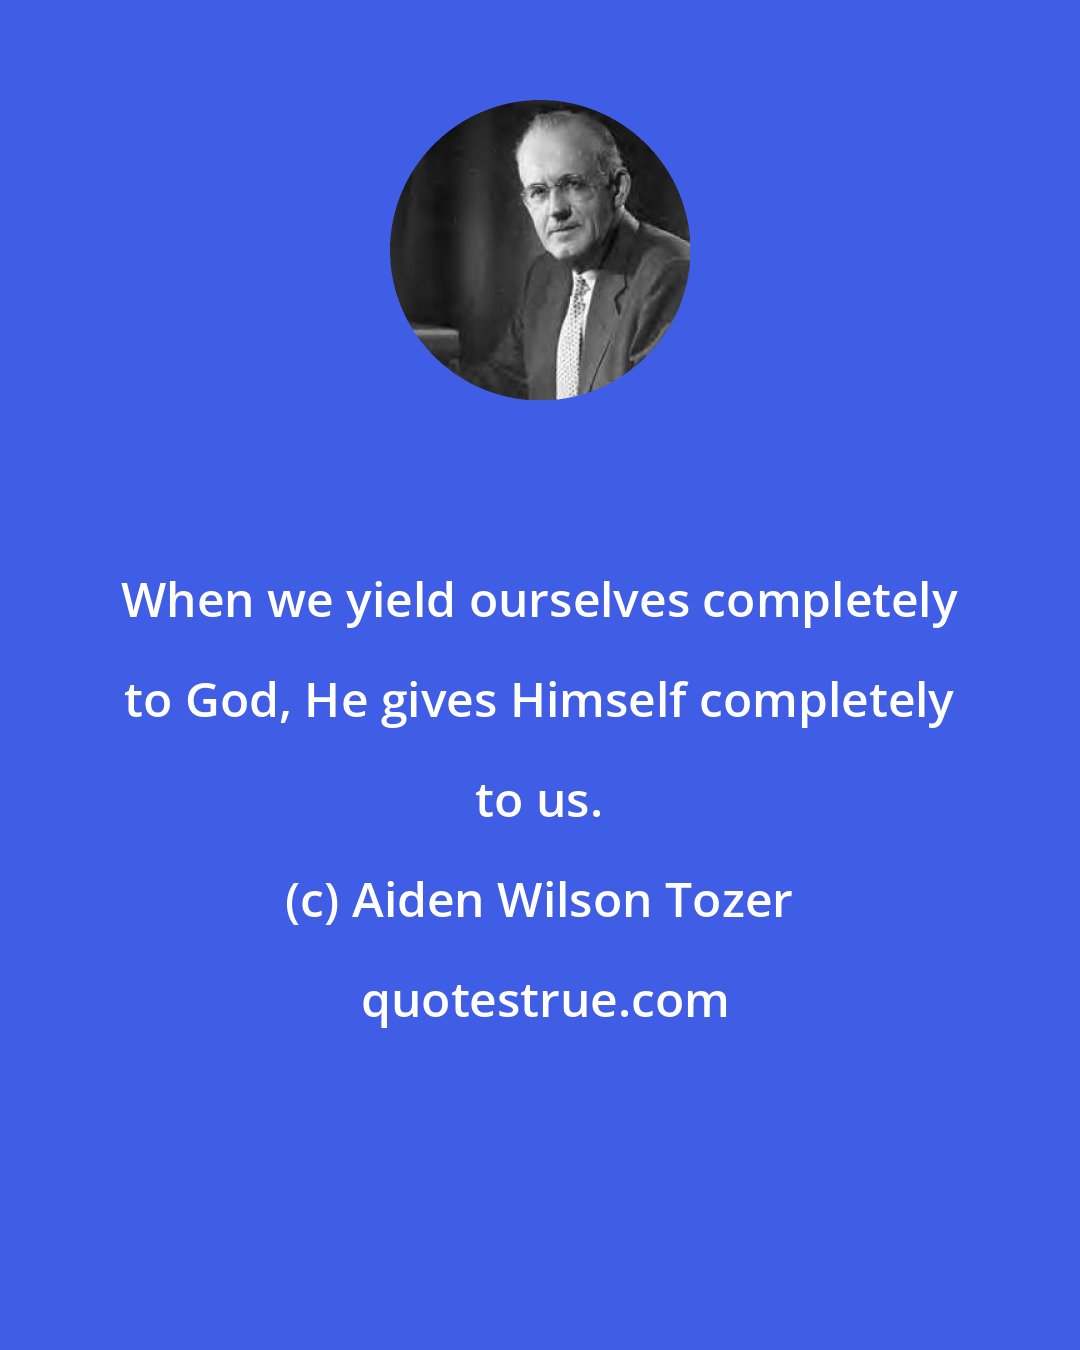 Aiden Wilson Tozer: When we yield ourselves completely to God, He gives Himself completely to us.